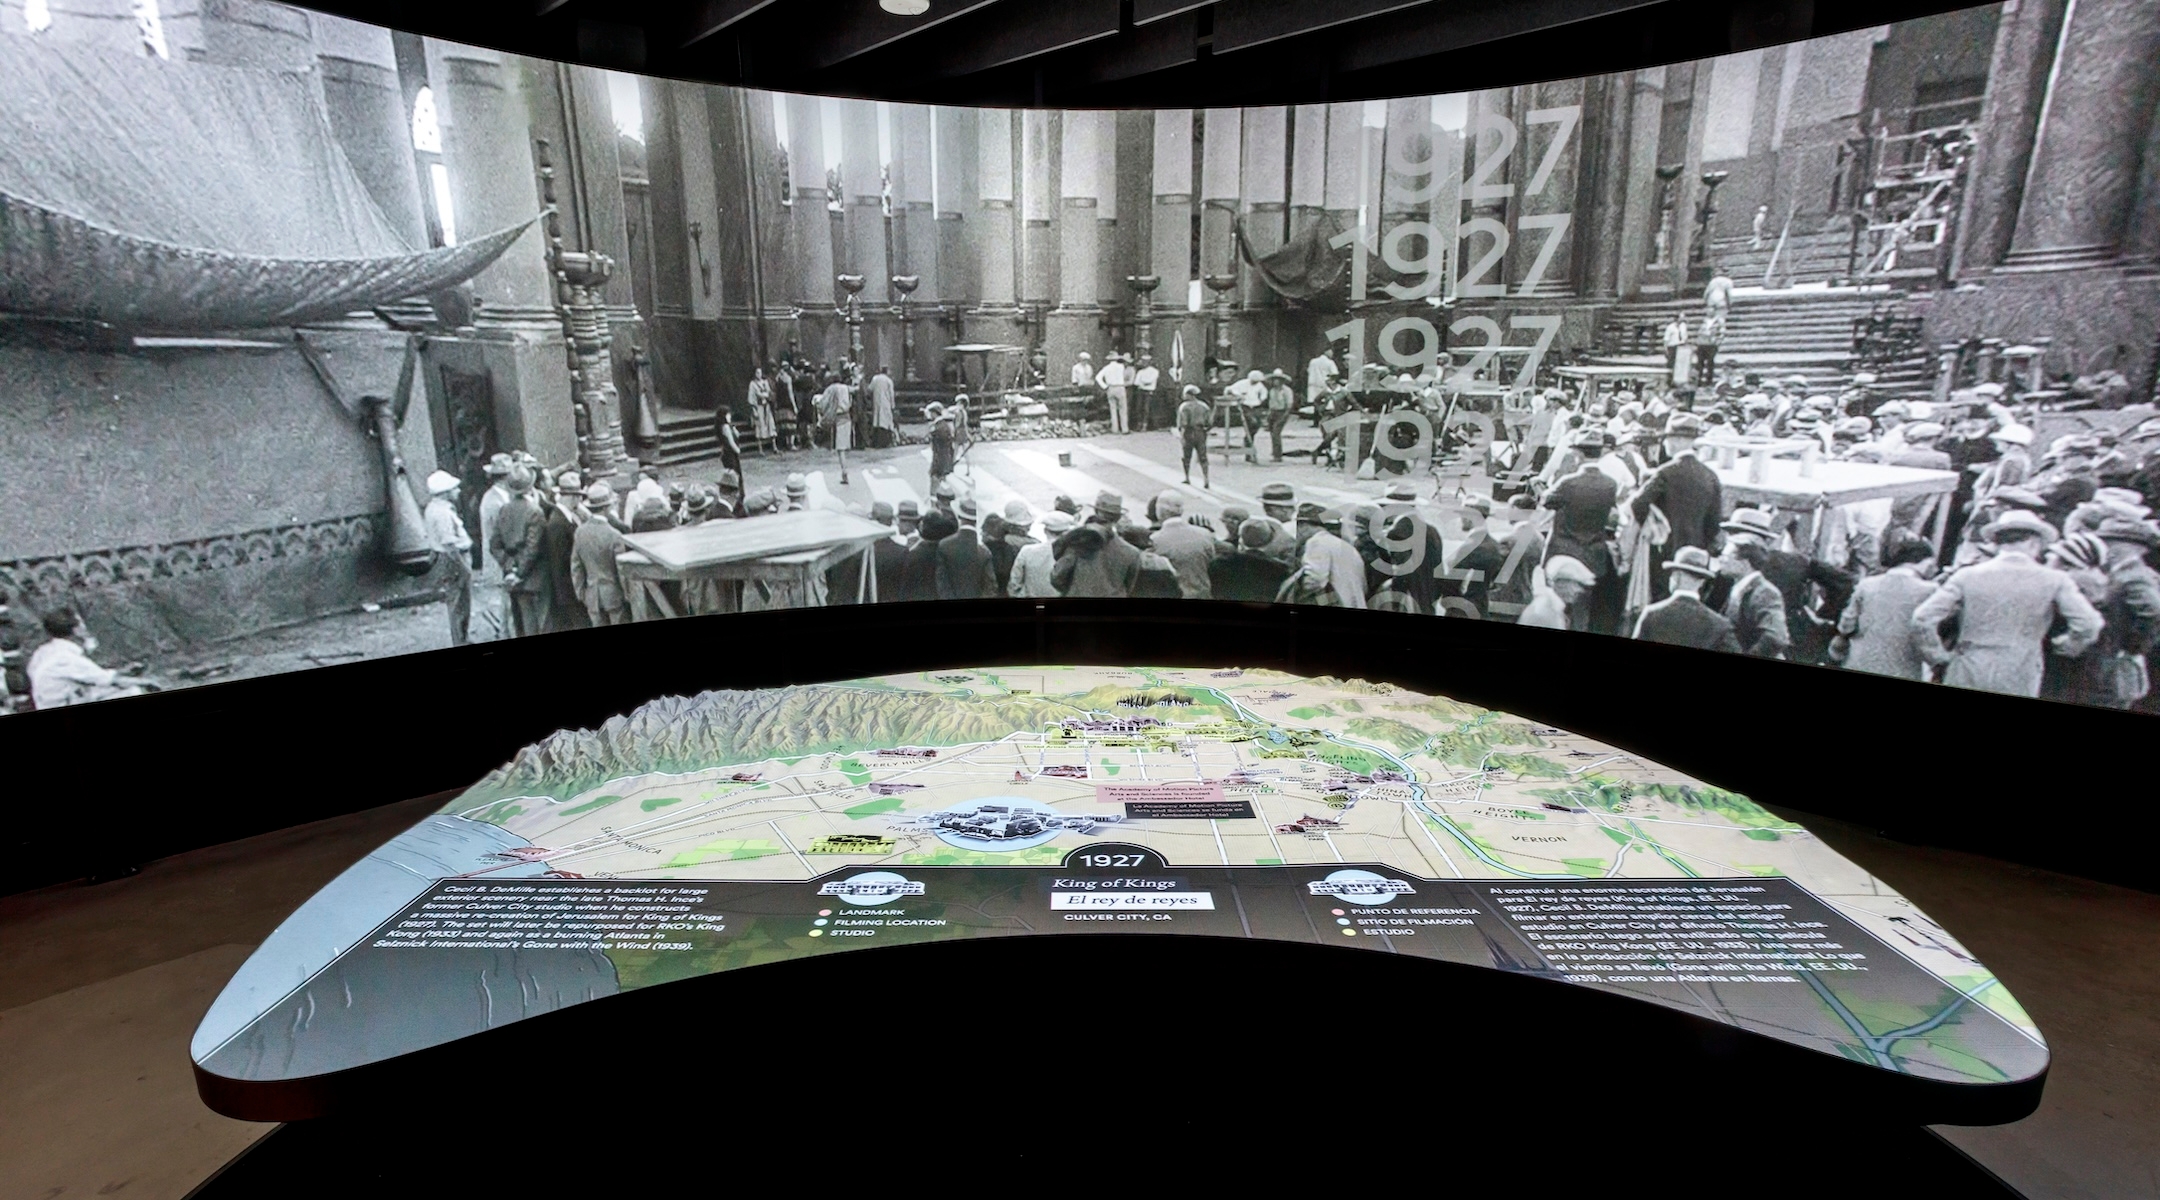 A view of the topographical map inside the “Hollywoodland” exhibit. (Josh White, JWPictures/Academy Museum Foundation)